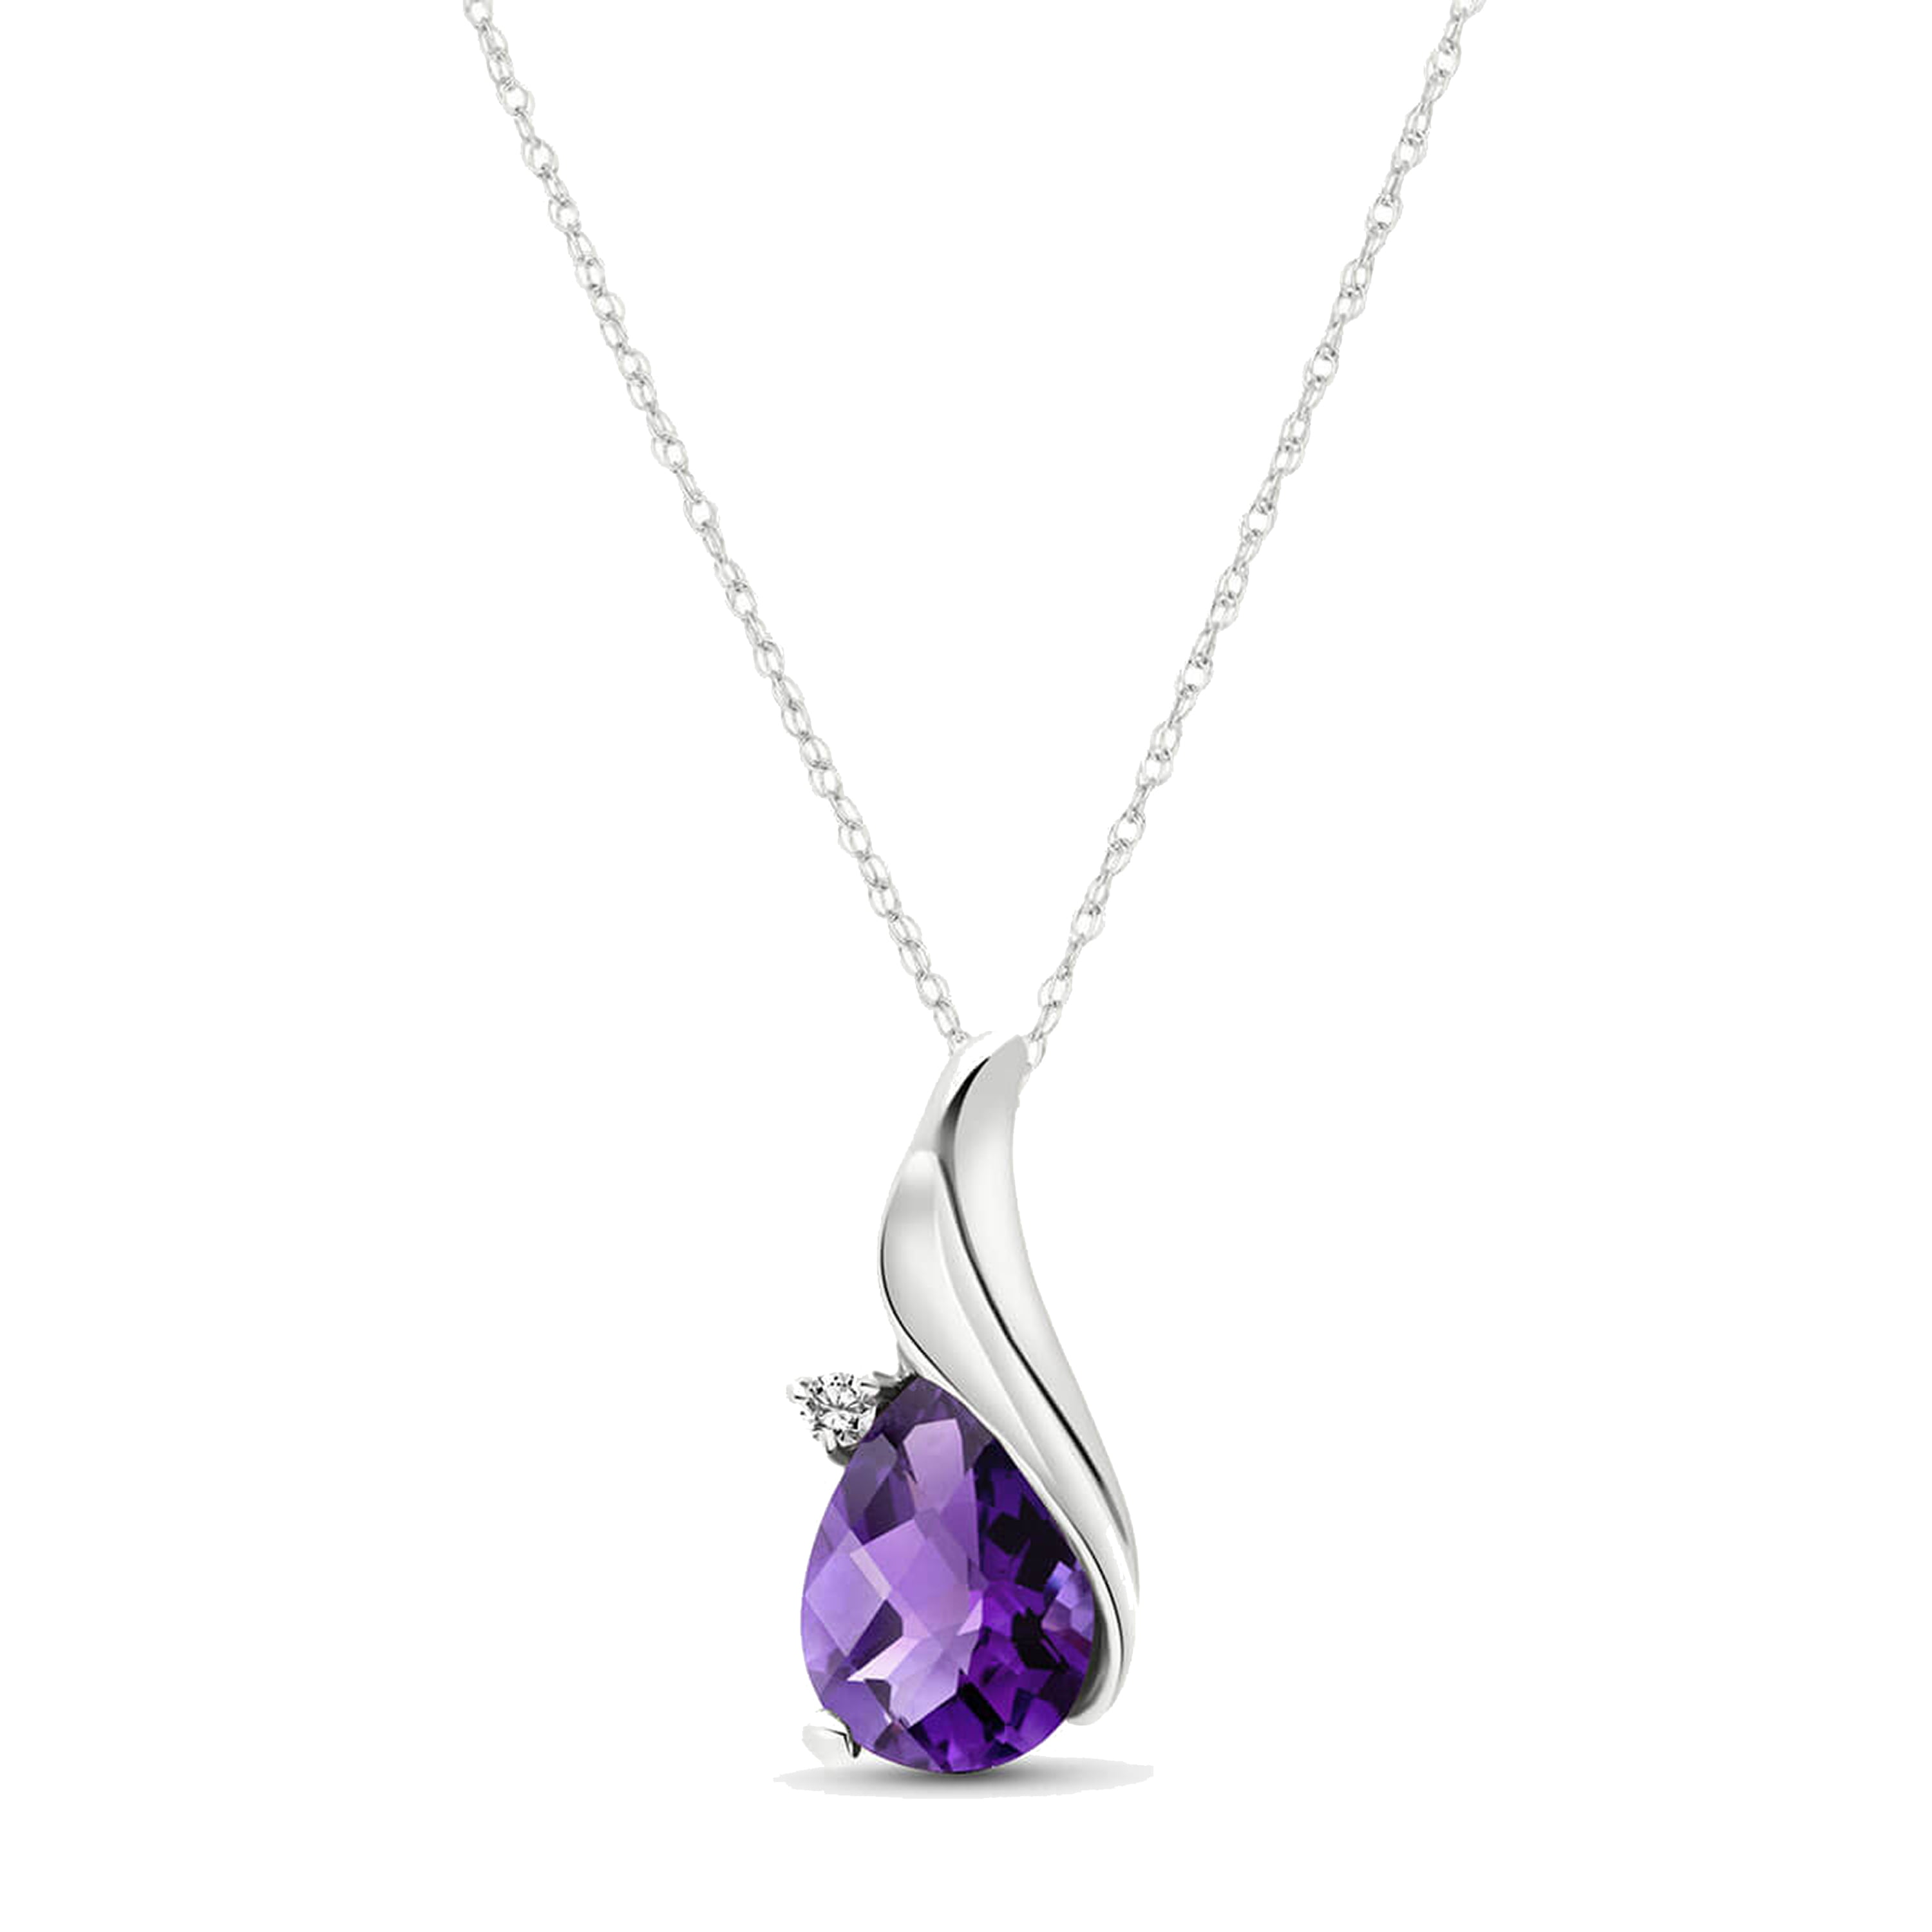 Siloam Miracle - Amethyst & Diamond Necklace in 18K White Gold